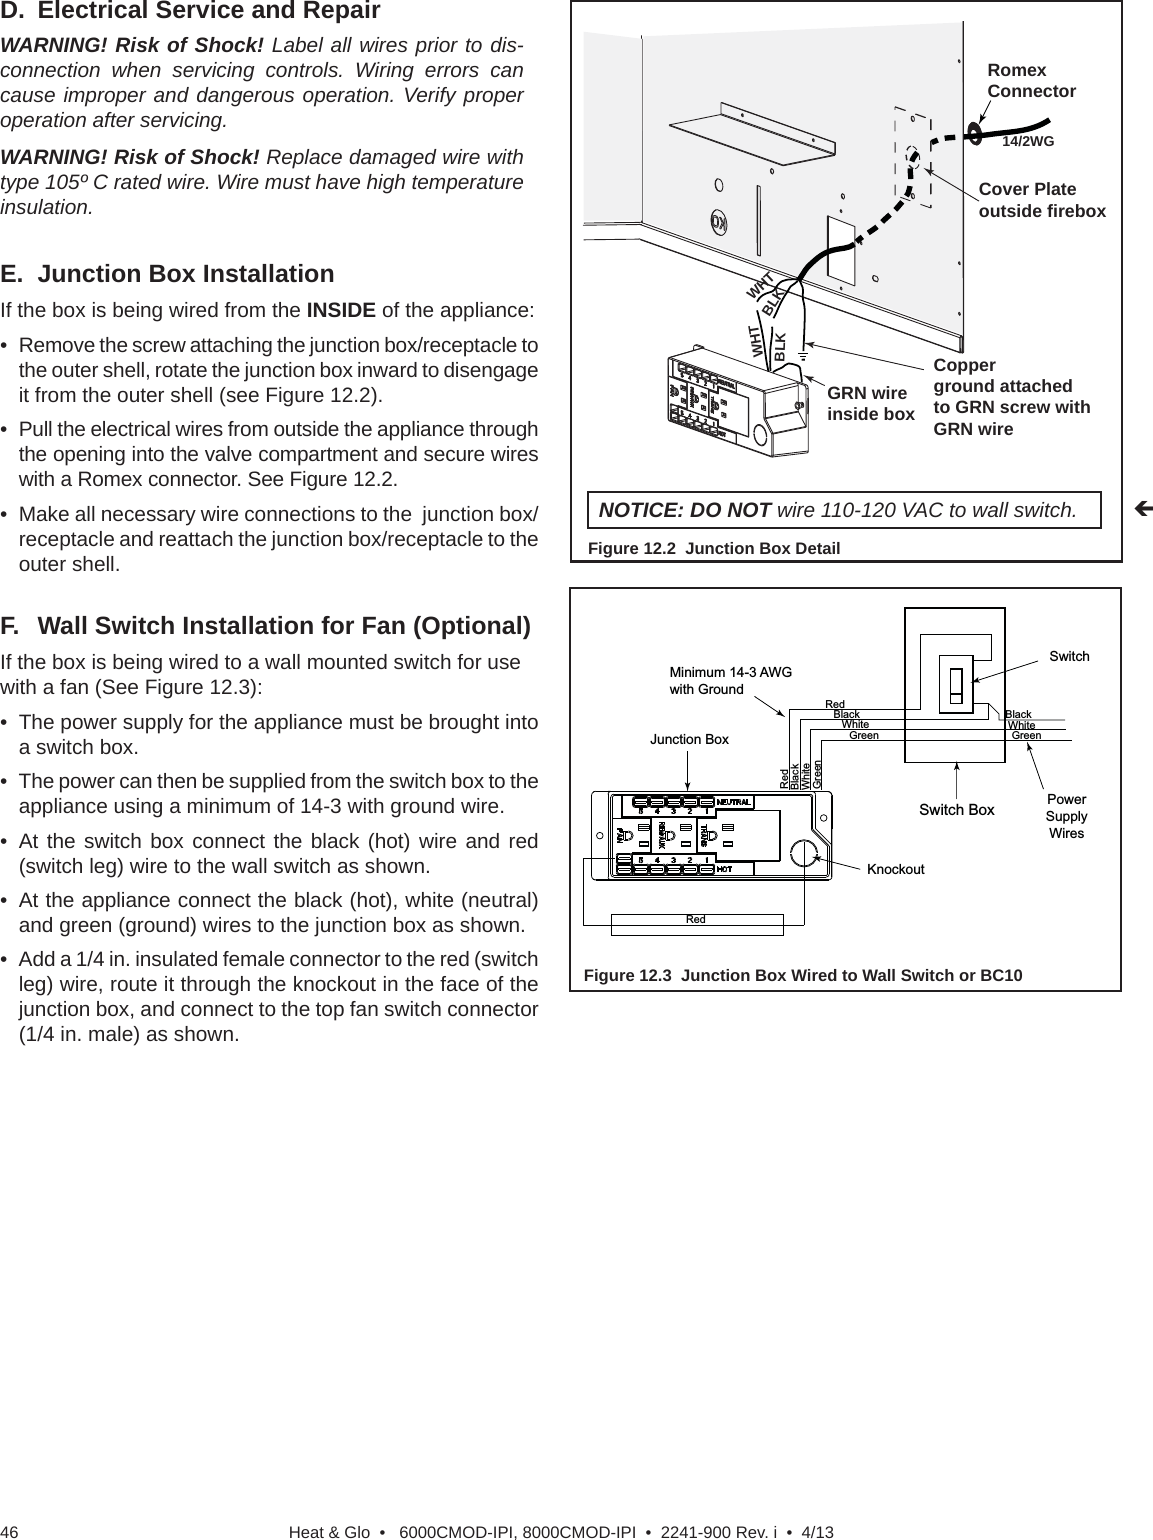 Heat &amp; Glo  •   6000CMOD-IPI, 8000CMOD-IPI  •  2241-900 Rev. i  •  4/1346F.  Wall Switch Installation for Fan (Optional)If the box is being wired to a wall mounted switch for use with a fan (See Figure 12.3):•  The power supply for the appliance must be brought into a switch box.•  The power can then be supplied from the switch box to the appliance using a minimum of 14-3 with ground wire.• At the switch box connect the black (hot) wire and red (switch leg) wire to the wall switch as shown.•  At the appliance connect the black (hot), white (neutral) and green (ground) wires to the junction box as shown.•  Add a 1/4 in. insulated female connector to the red (switch leg) wire, route it through the knockout in the face of the junction box, and connect to the top fan switch connector (1/4 in. male) as shown.WHTWHTBLKBLKGRN wire inside boxCopperground attachedto GRN screw withGRN wire14/2WGCover Plateoutside fireboxRomex ConnectorFigure 12.2  Junction Box DetailNOTICE: DO NOT wire 110-120 VAC to wall switch.RedSwitchSwitch BoxRedBlackBlackGreen GreenWhitePowerSupplyWiresWhiteRedBlackGreenWhiteMinimum 14-3 AWGwith GroundJunction BoxKnockoutFigure 12.3  Junction Box Wired to Wall Switch or BC10E.  Junction Box InstallationIf the box is being wired from the INSIDE of the appliance:•  Remove the screw attaching the junction box/receptacle to the outer shell, rotate the junction box inward to disengage it from the outer shell (see Figure 12.2).•  Pull the electrical wires from outside the appliance through the opening into the valve compartment and secure wires with a Romex connector. See Figure 12.2.•  Make all necessary wire connections to the  junction box/receptacle and reattach the junction box/receptacle to the outer shell.D.  Electrical Service and RepairWARNING! Risk of Shock! Label all wires prior to dis-connection when servicing controls. Wiring errors can cause improper and dangerous operation. Verify proper operation after servicing.WARNING! Risk of Shock! Replace damaged wire with type 105º C rated wire. Wire must have high temperature insulation.